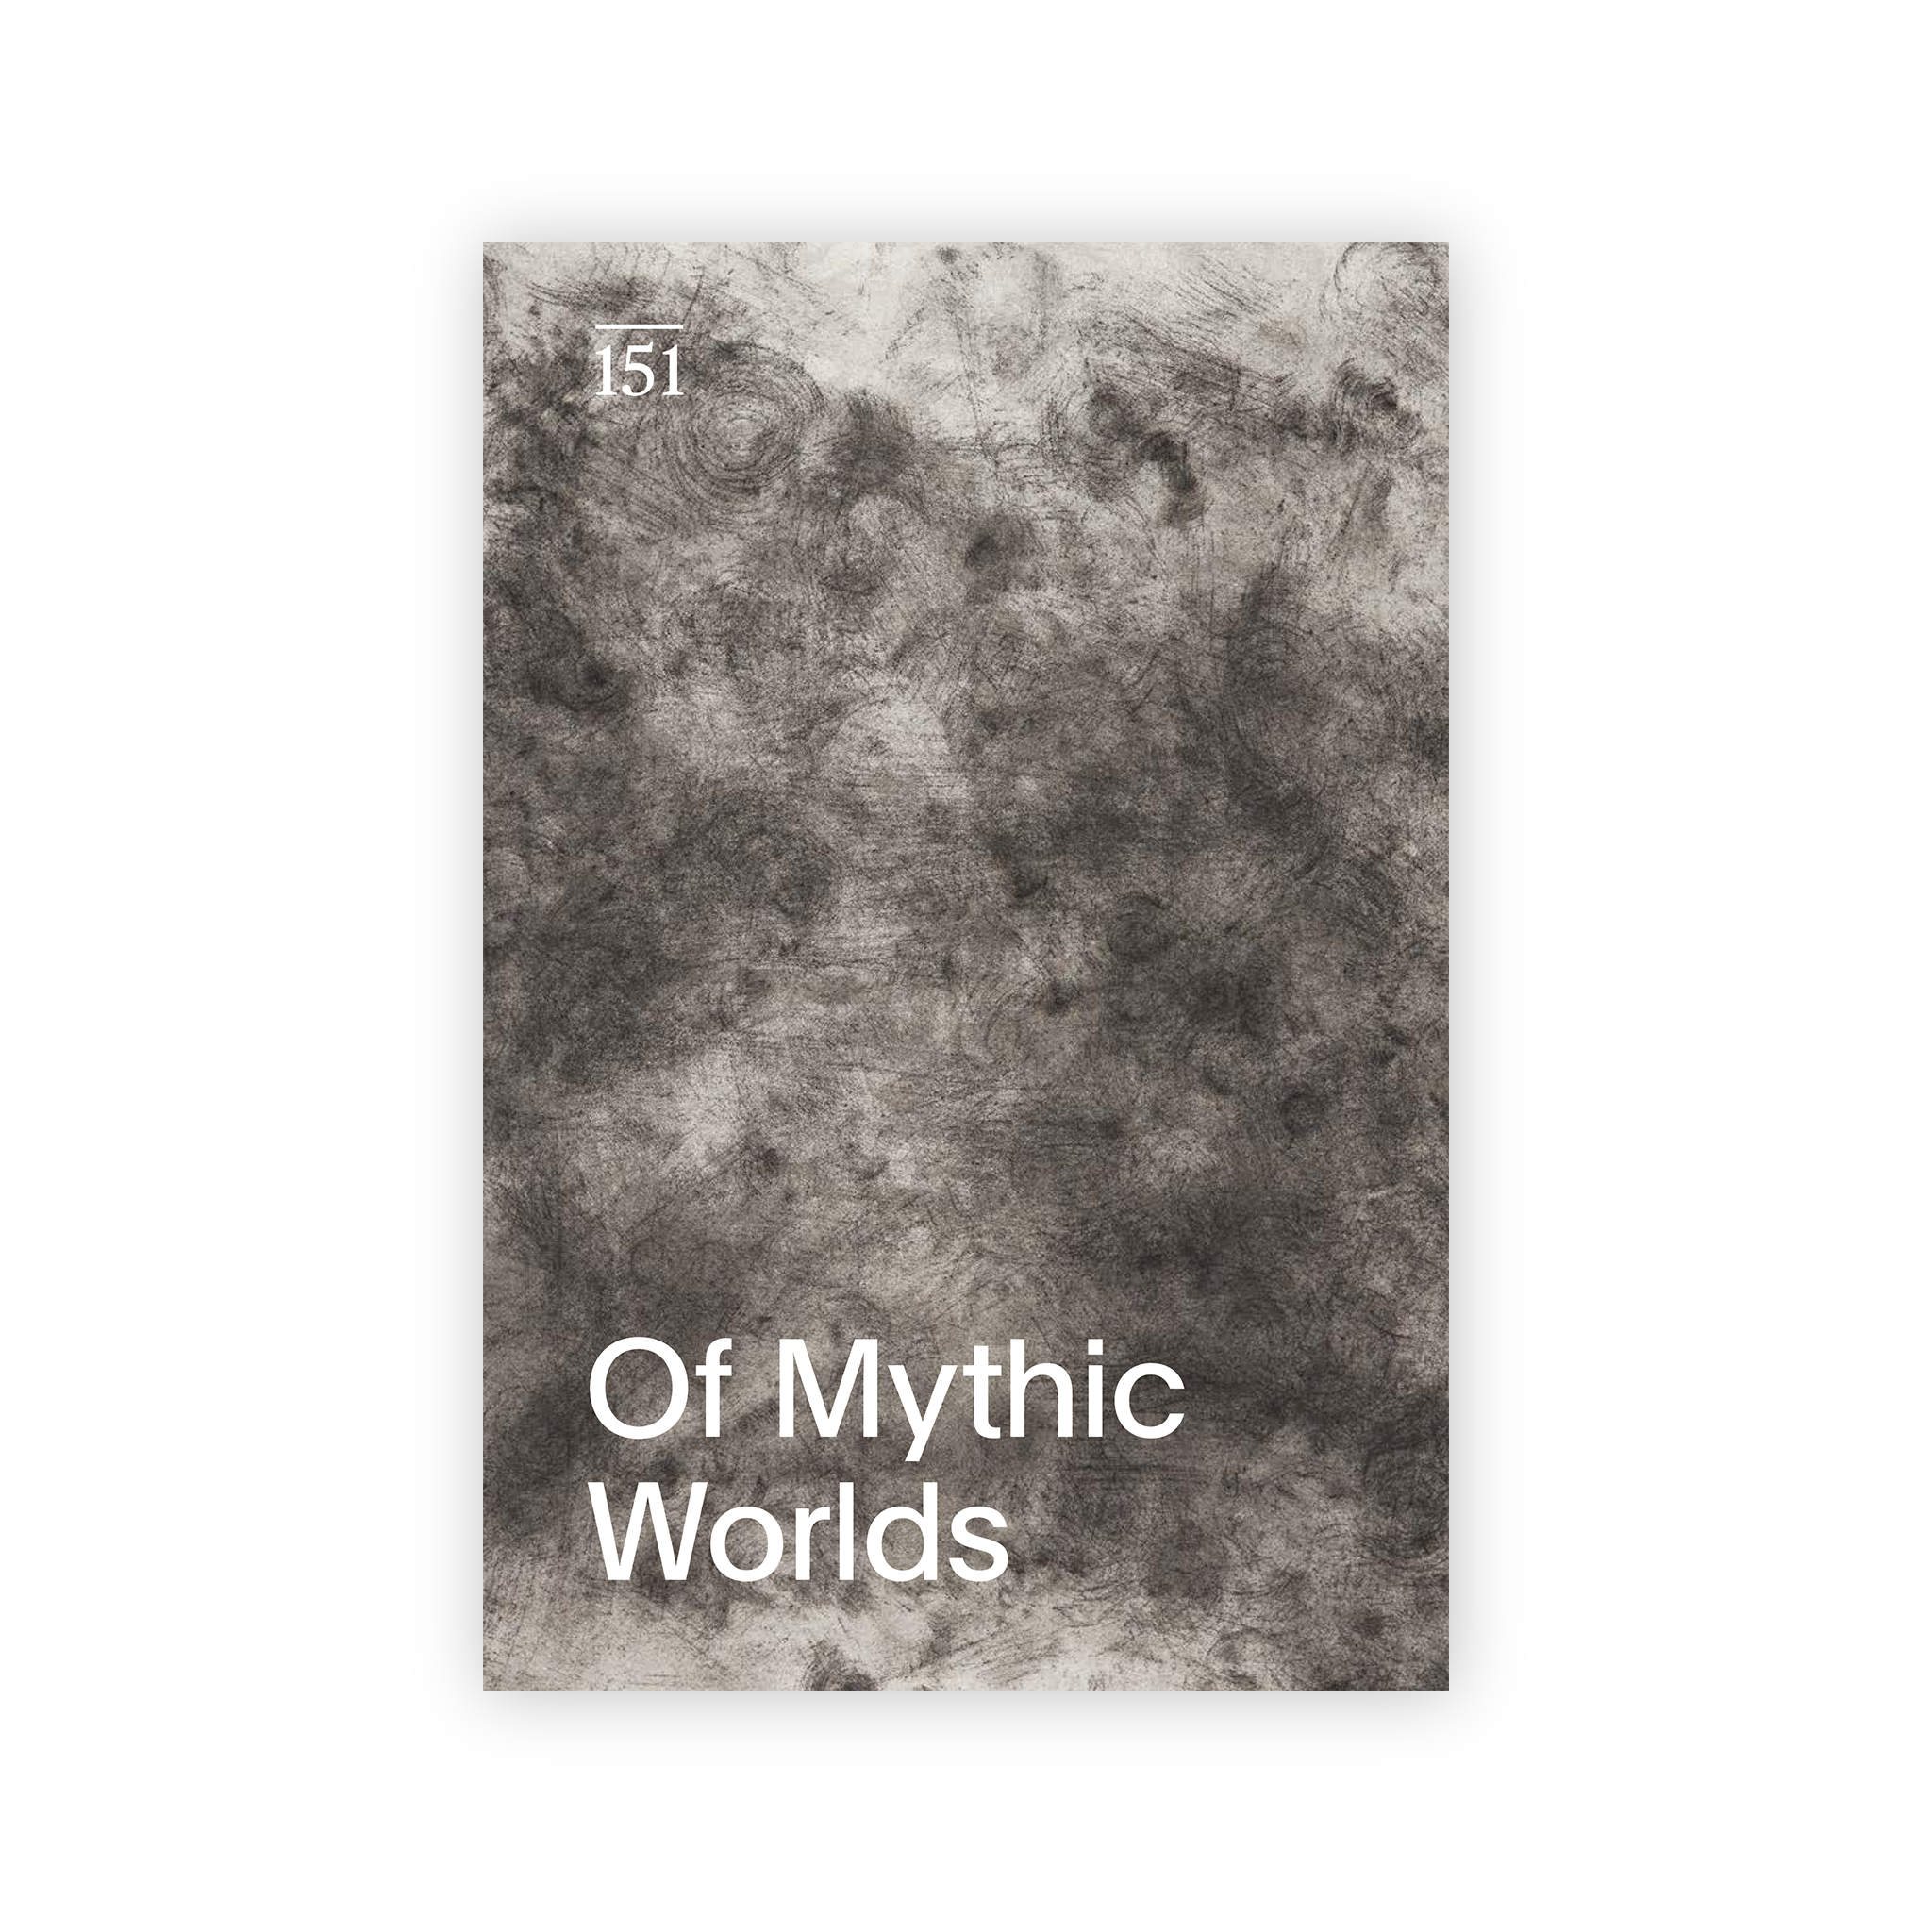 Front cover for "Of Mythic Worlds: Works from the Distant Past through the Present"